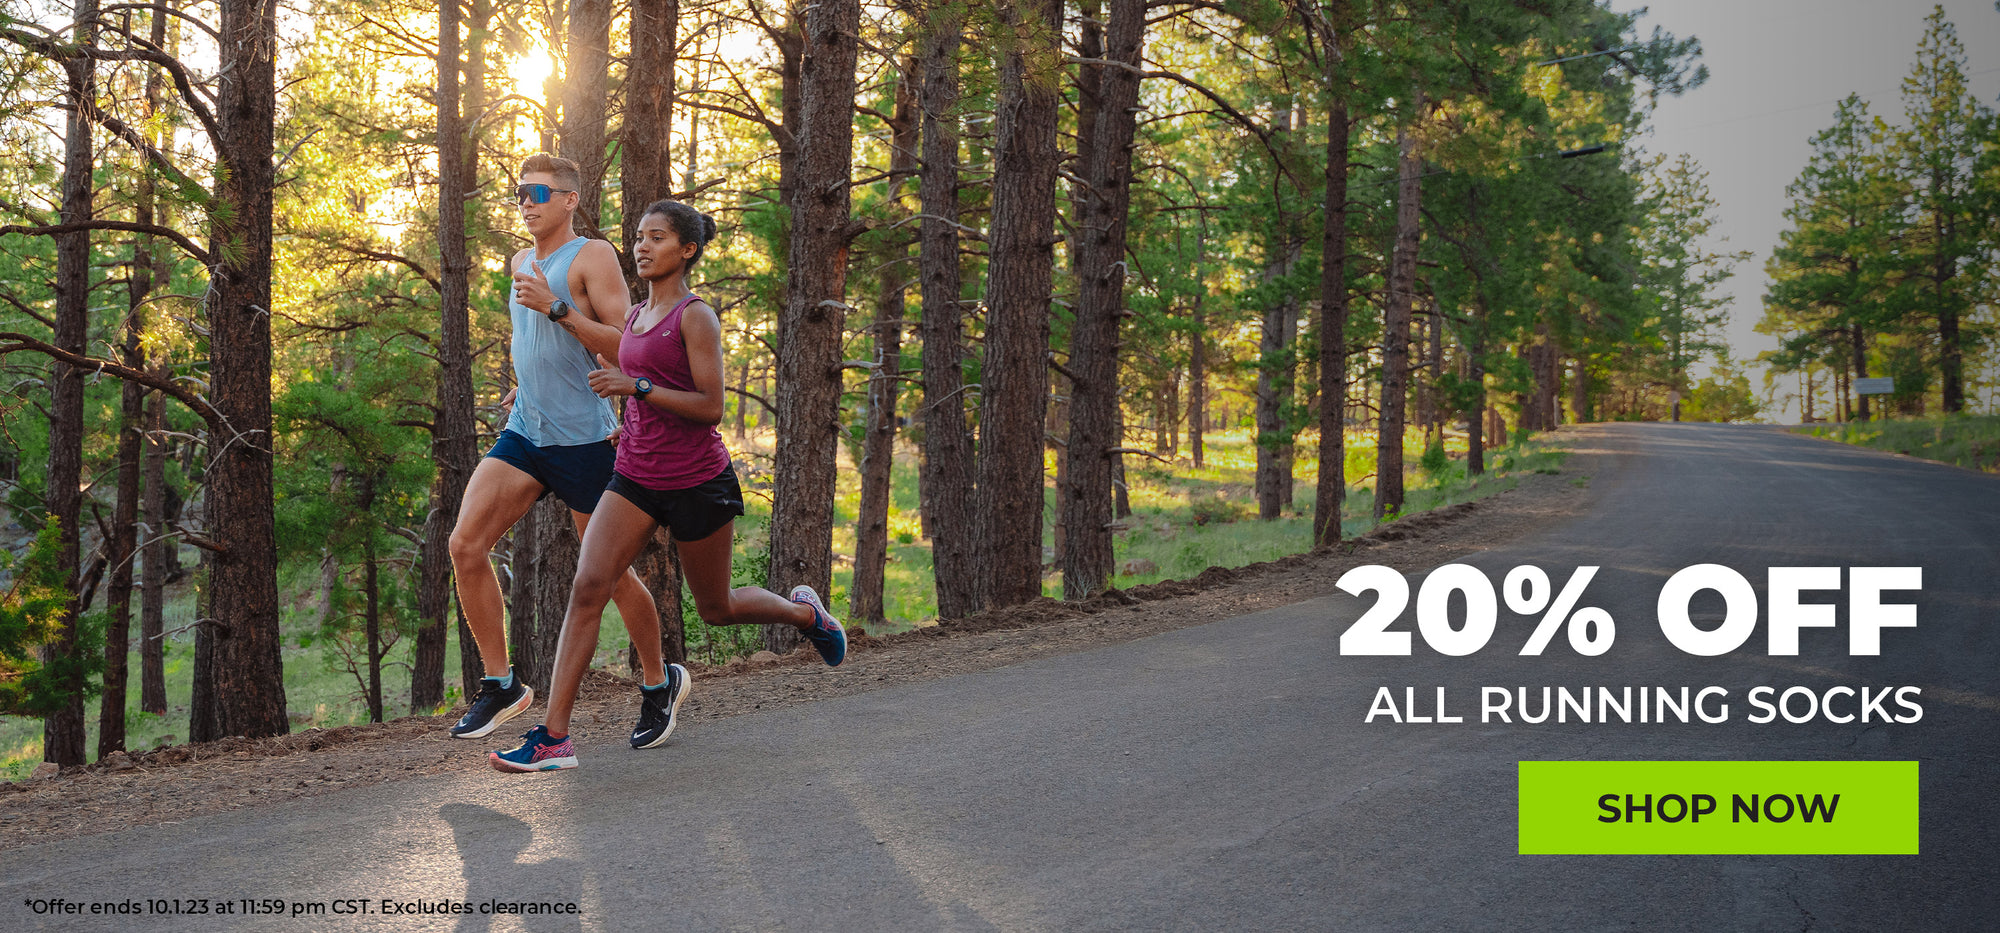 20% Off All Running Socks, Shop Now, *Offer ends 10.1.23 at 11:59 pm CST. Excludes clearance.